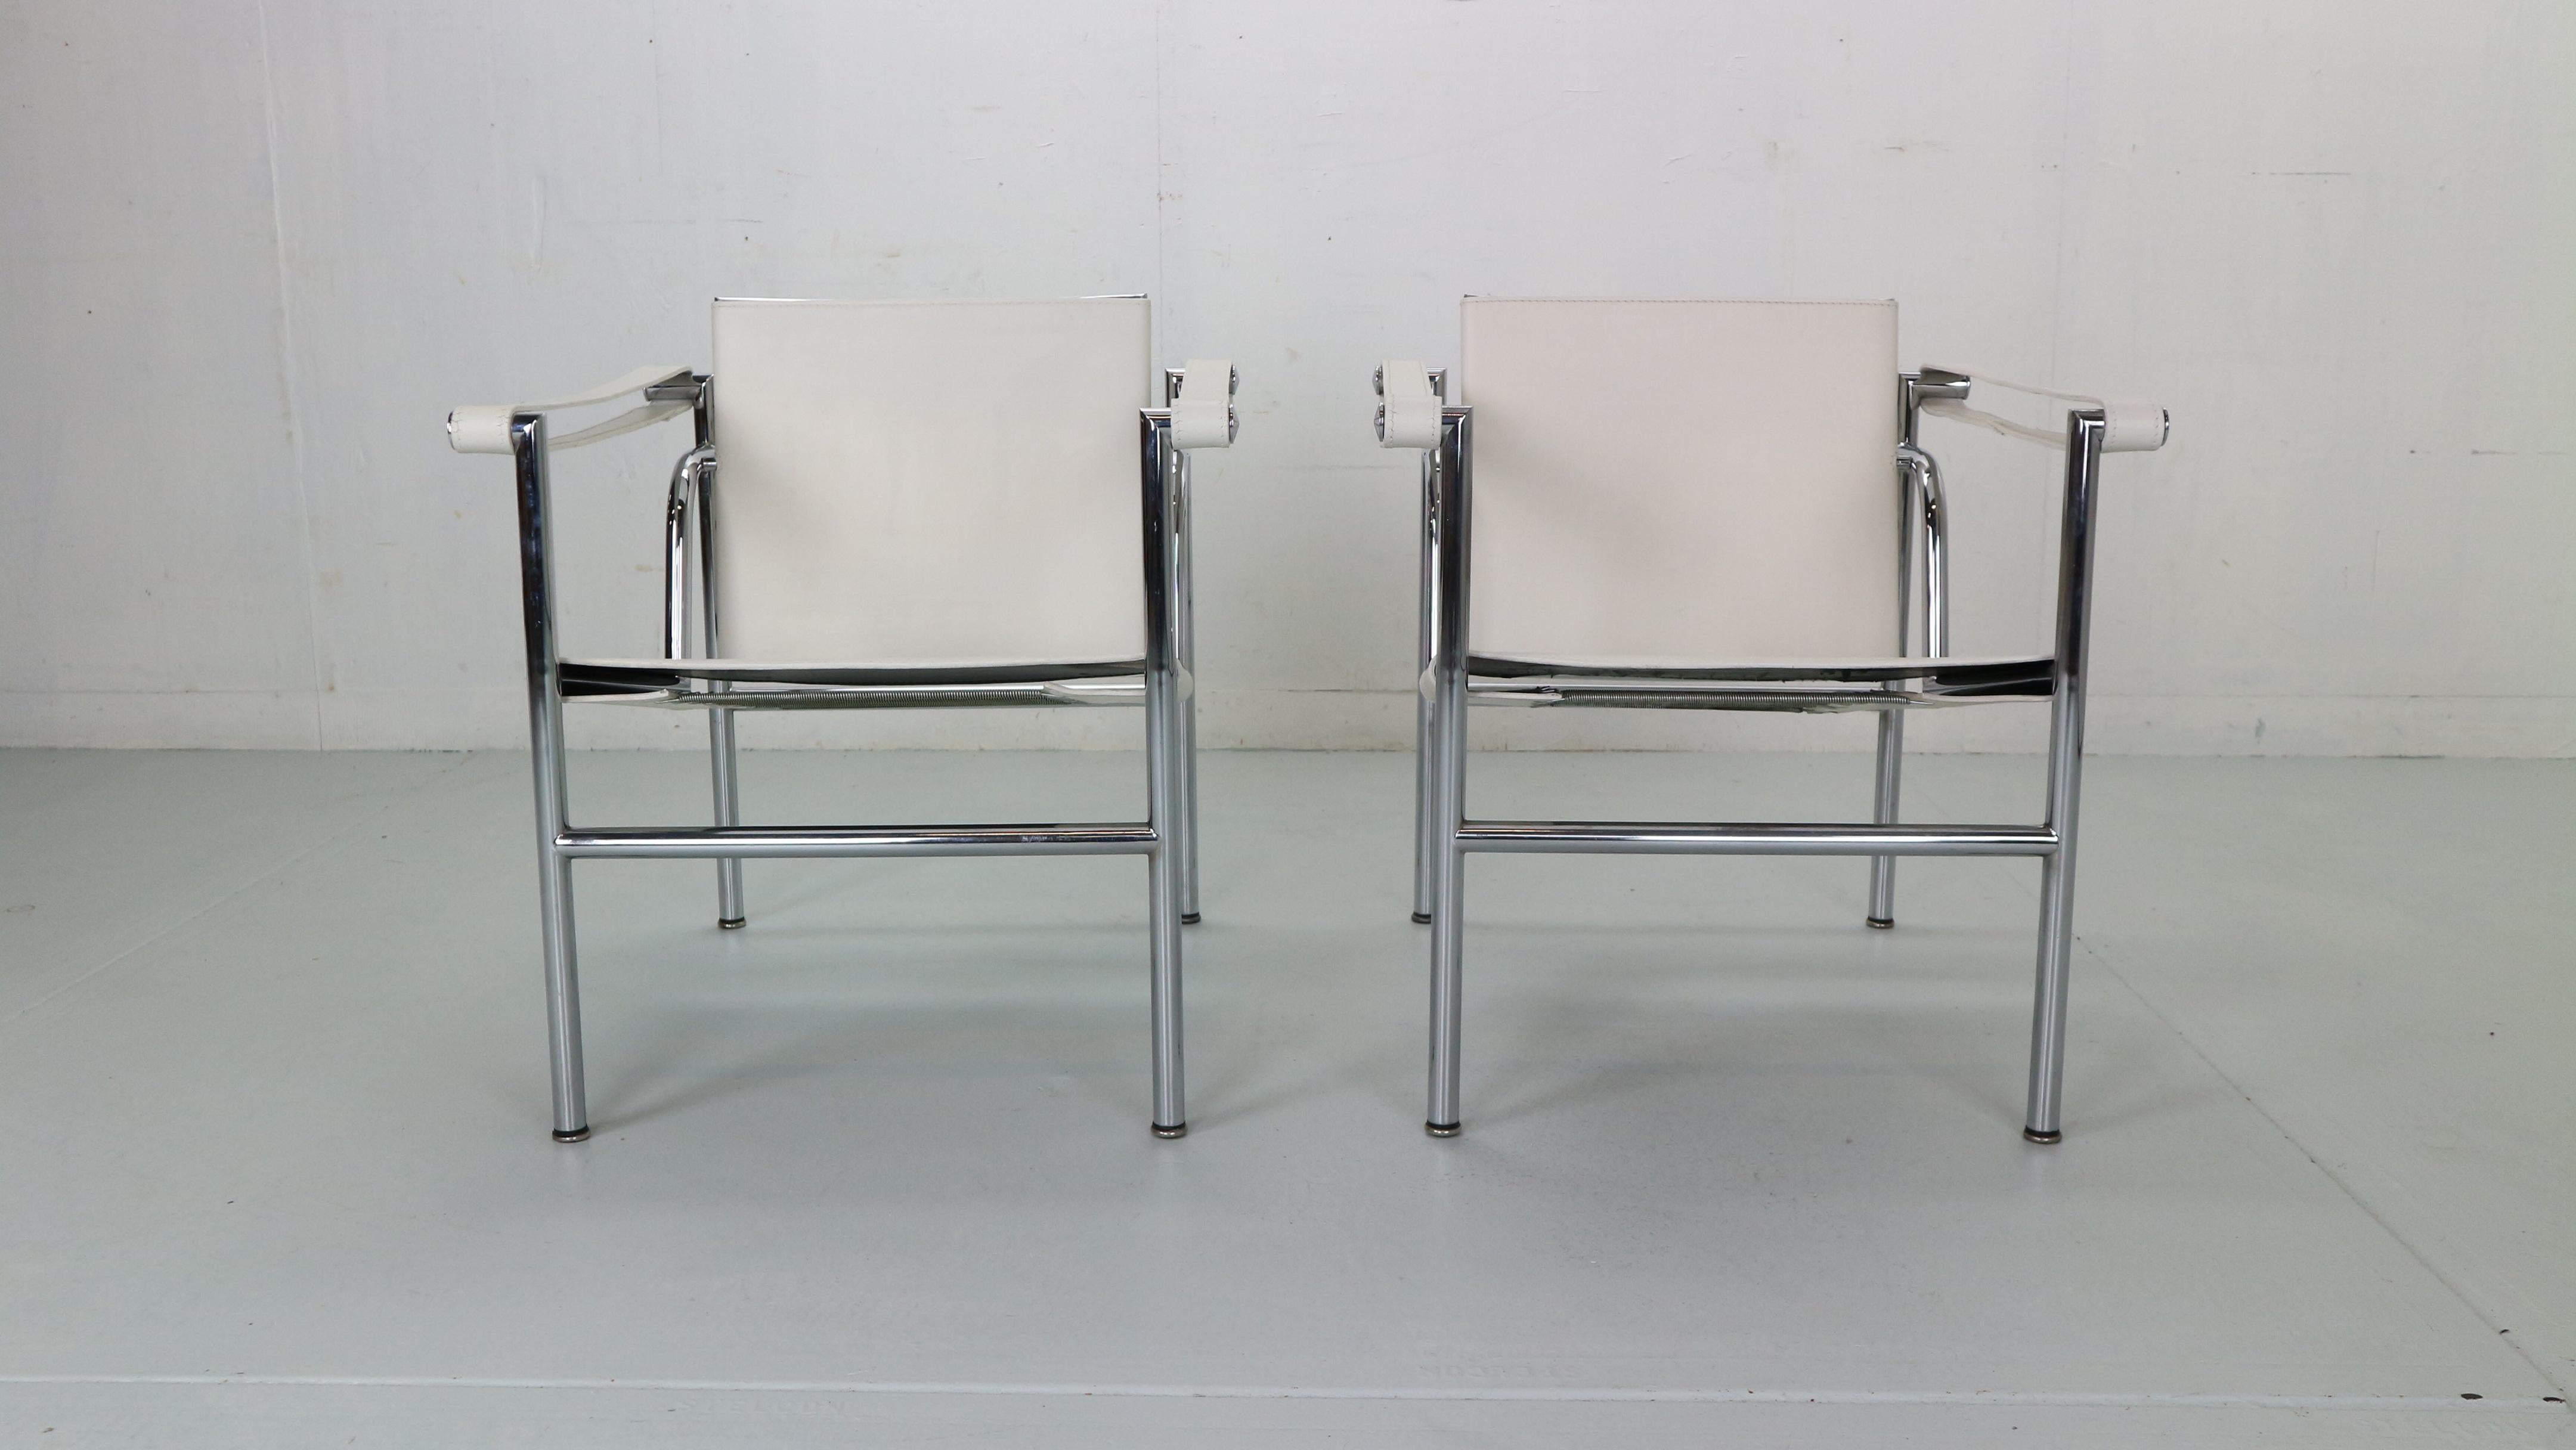 Set of 2 armchairs designed by Le Corbusier and manufactured for Cassina, famous Italian furniture manufacture in 1970s period.
Both chairs are original signed, low number early edition. 
Model number- LC1.
Chrome tubular frame and white original